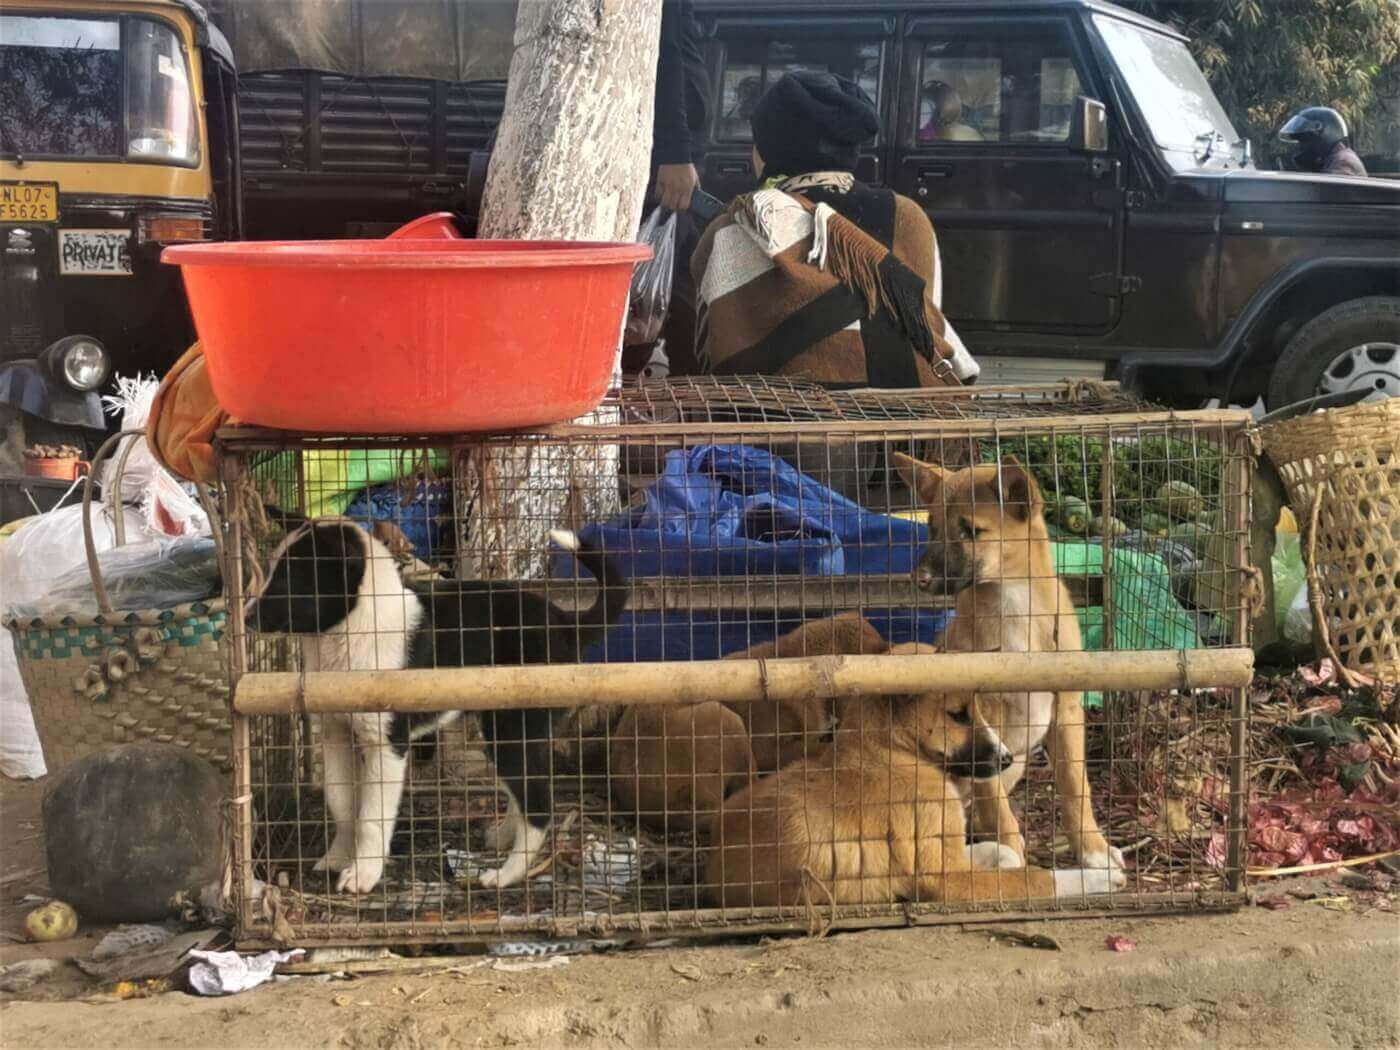 Dogs for sale at a live animal market in India.